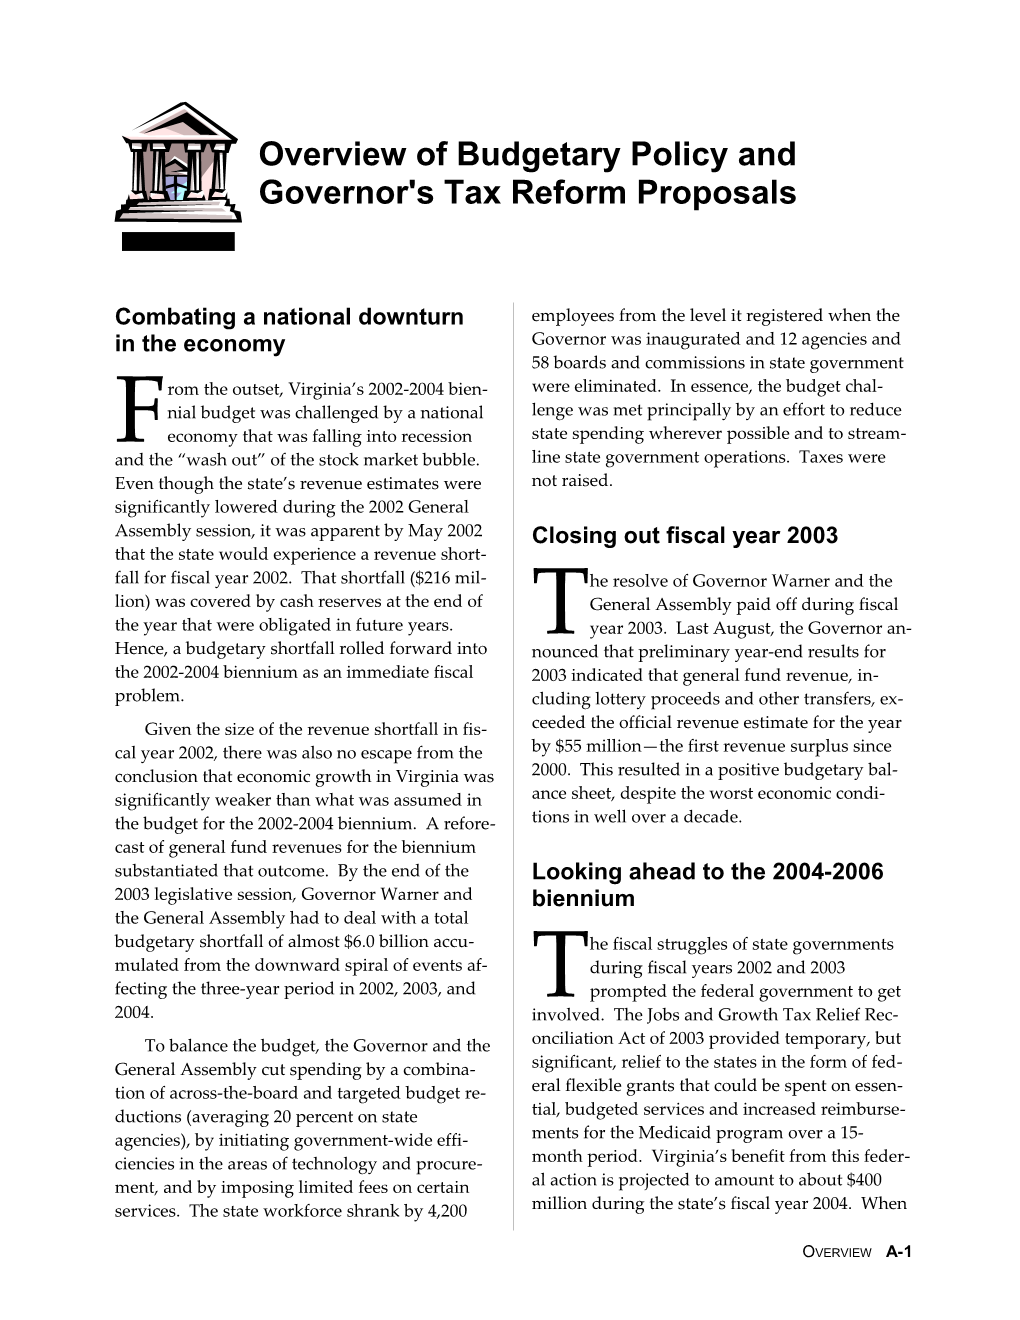 Overview of Budgetary Policy and Governor's Tax Reform Proposals